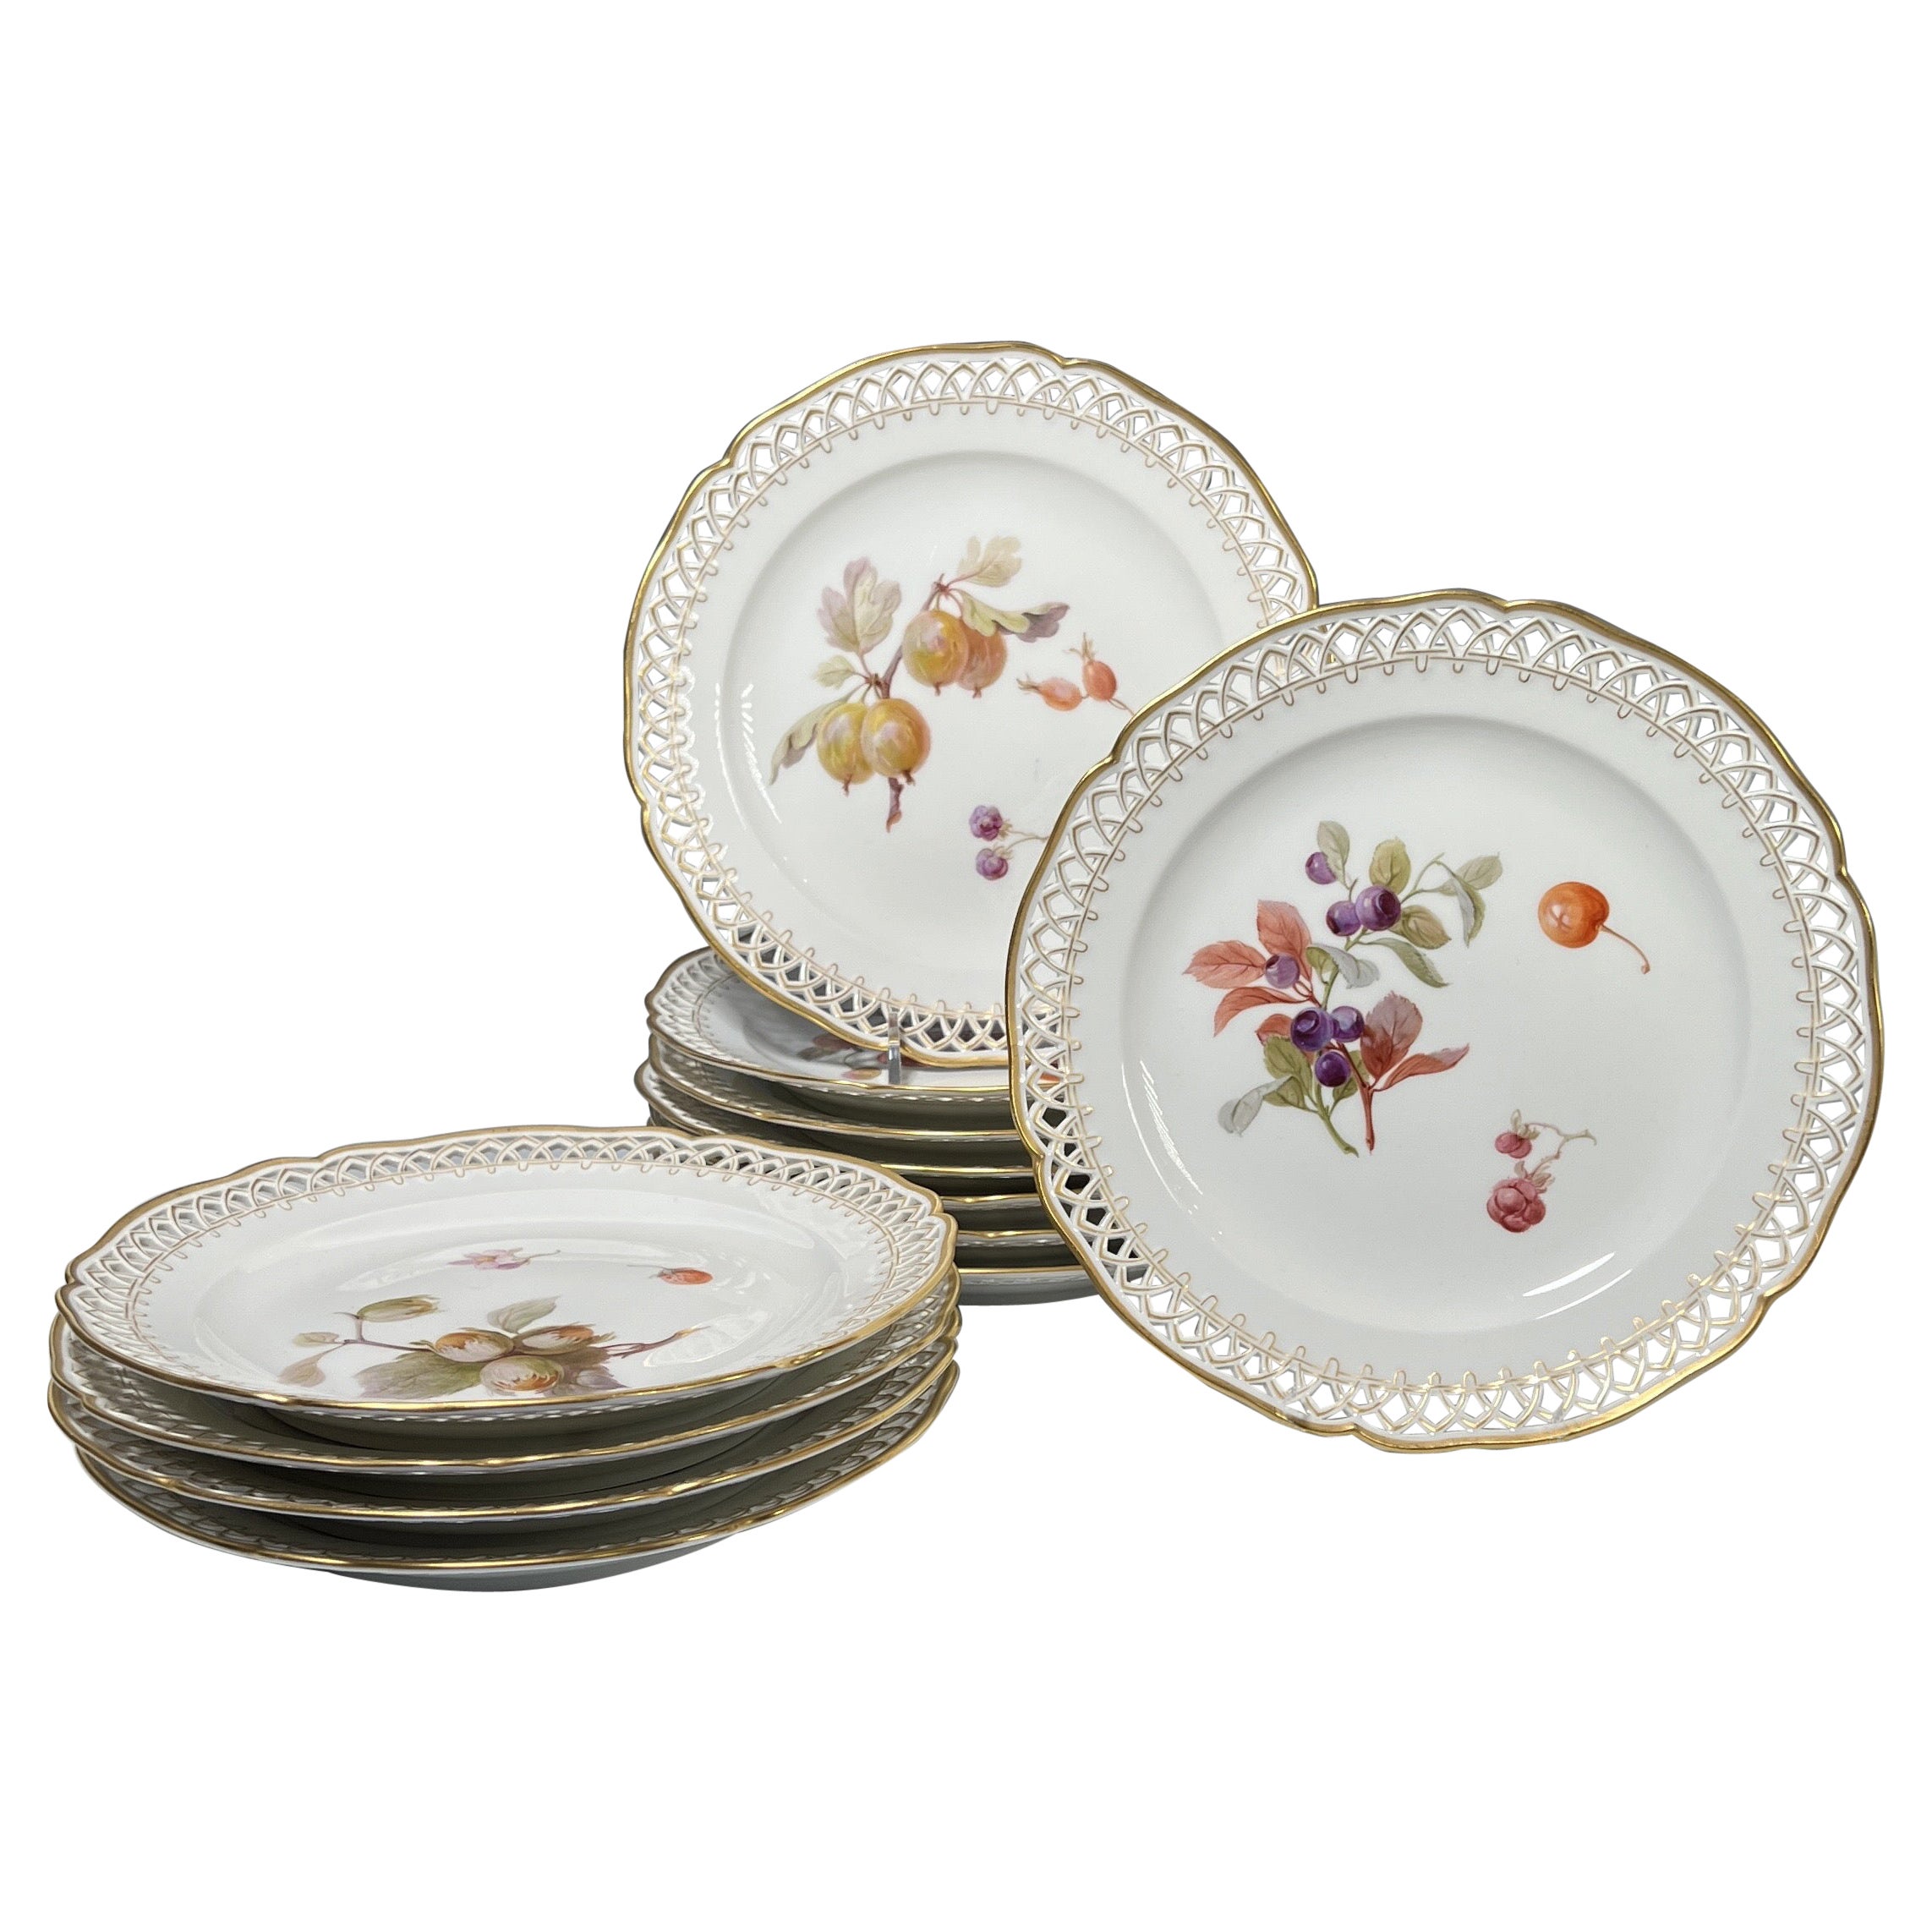 Set of 12 KPM Dessert Plates with Hand Painted Fruit Pierced & Gilt Borders For Sale